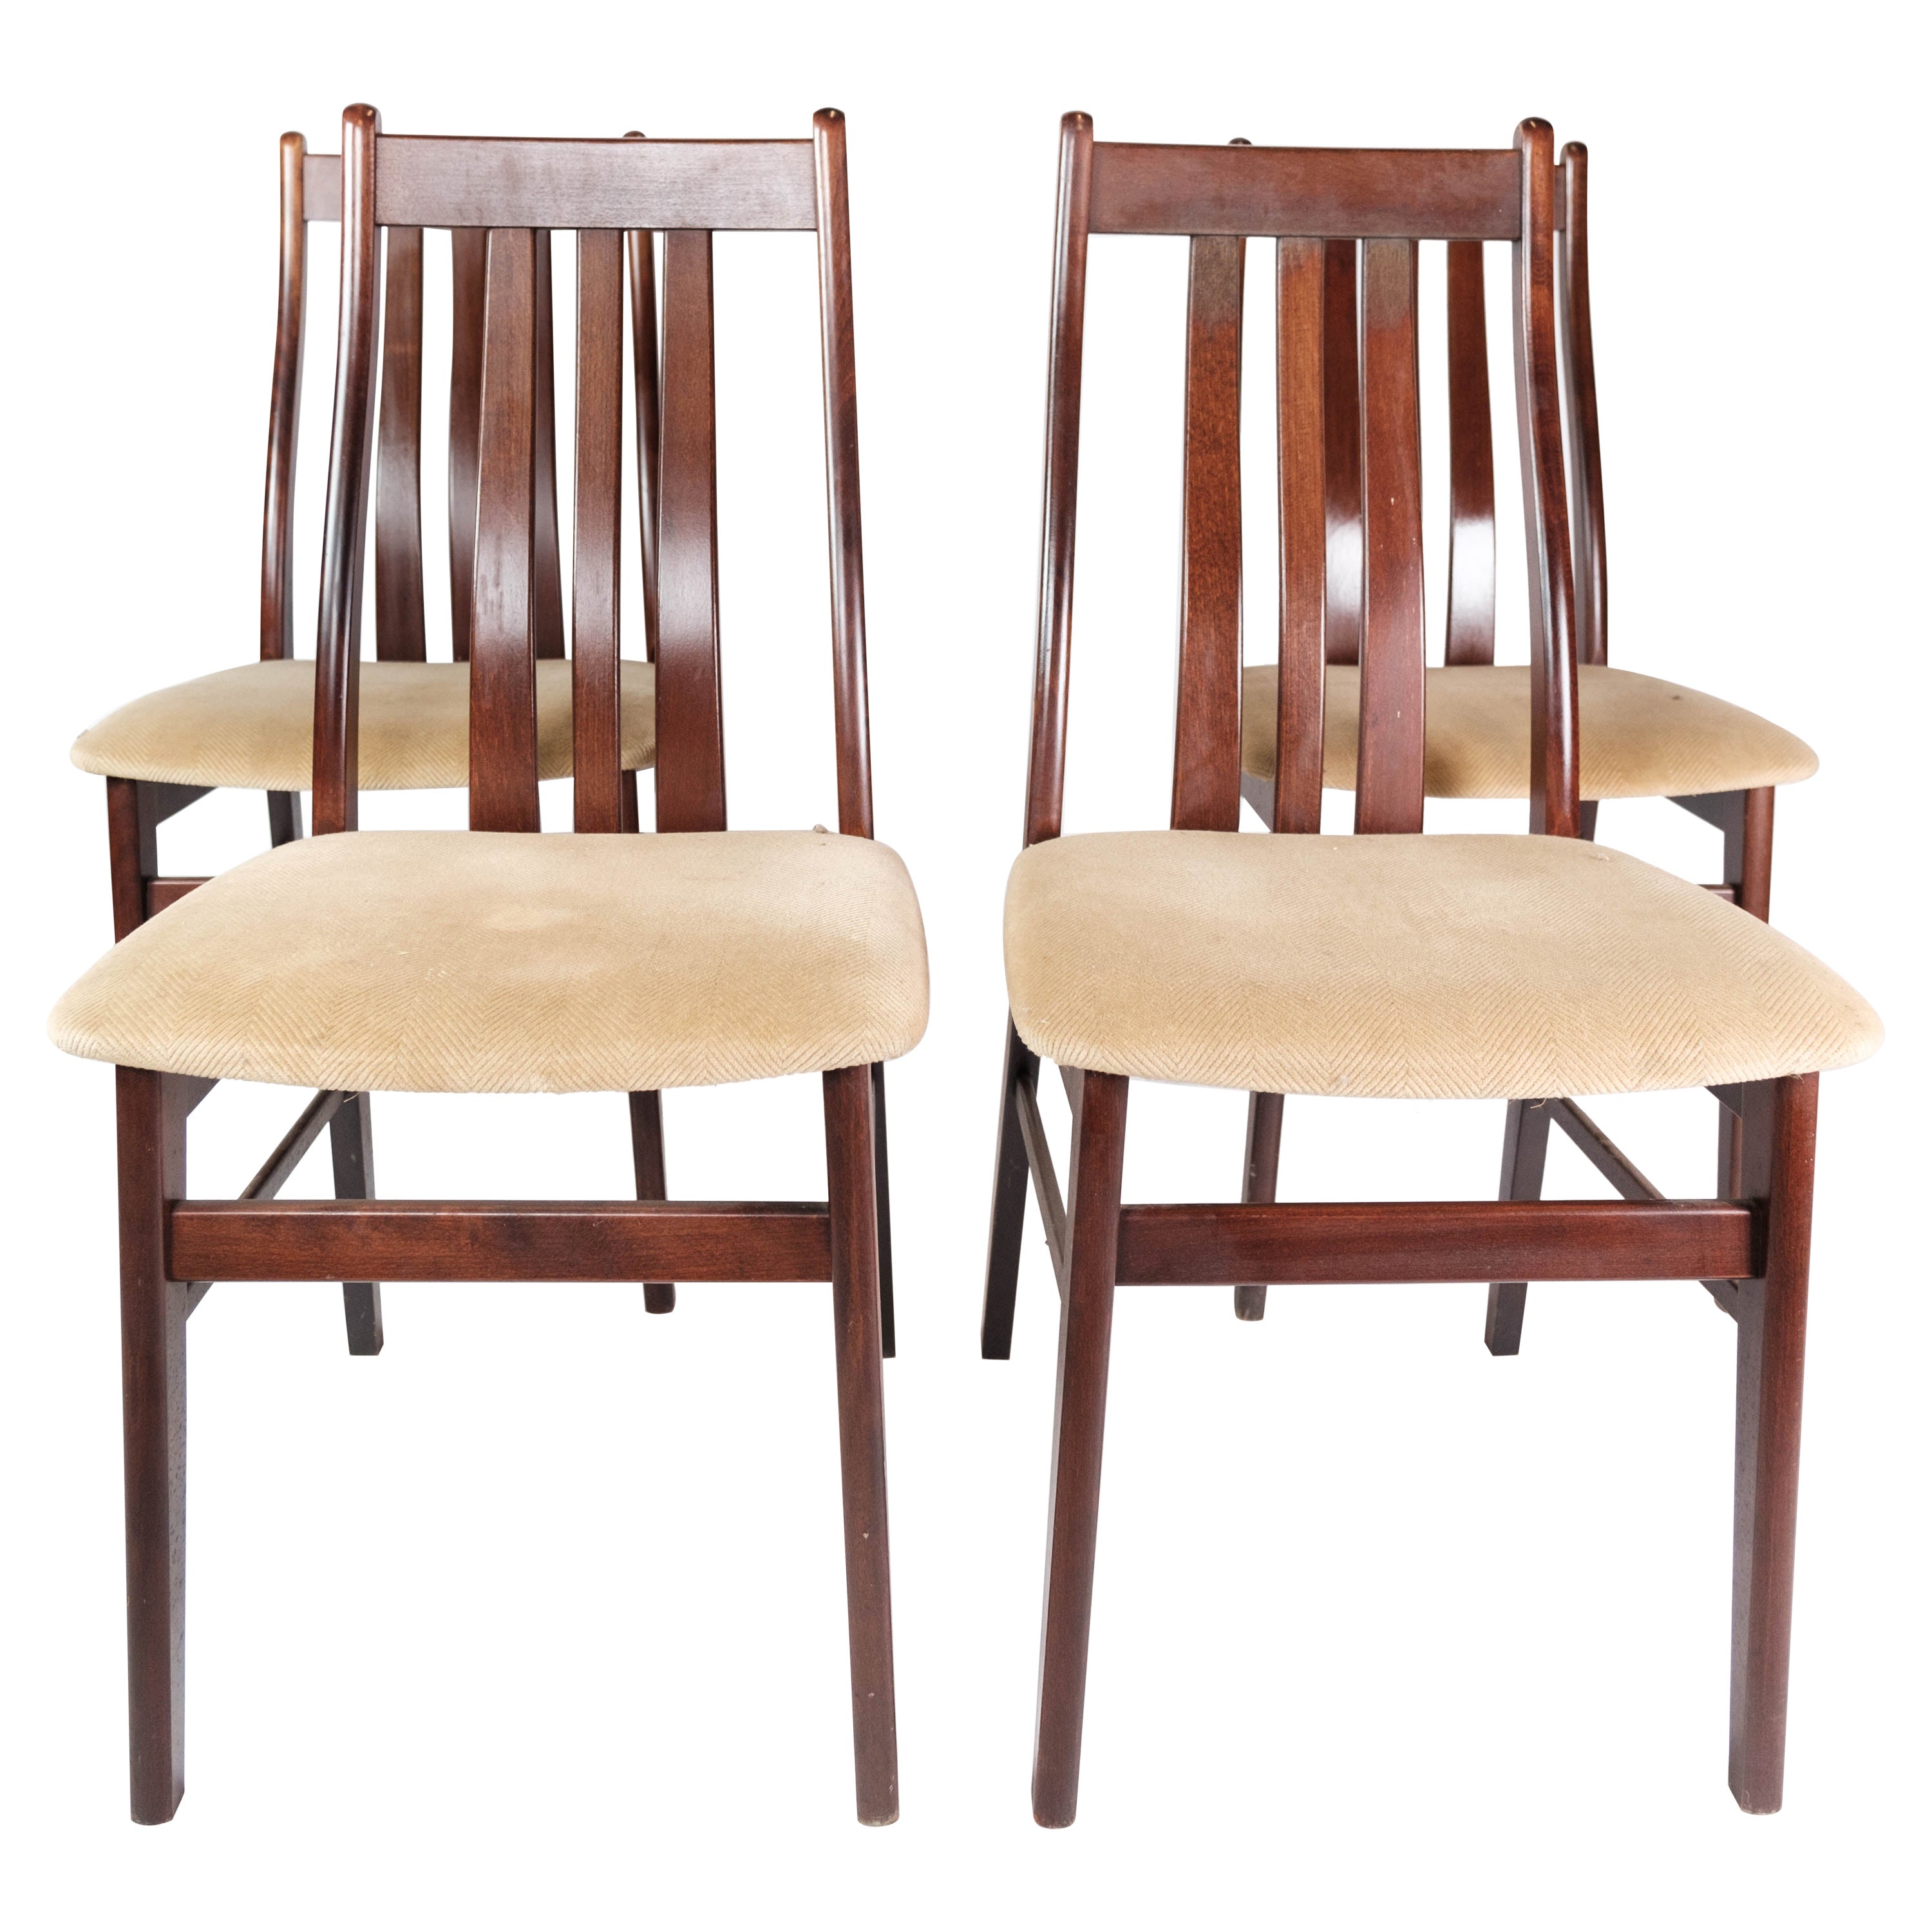 Set of Four Dining Room Chairs Made In Mahogany By Farstrup From 1960s